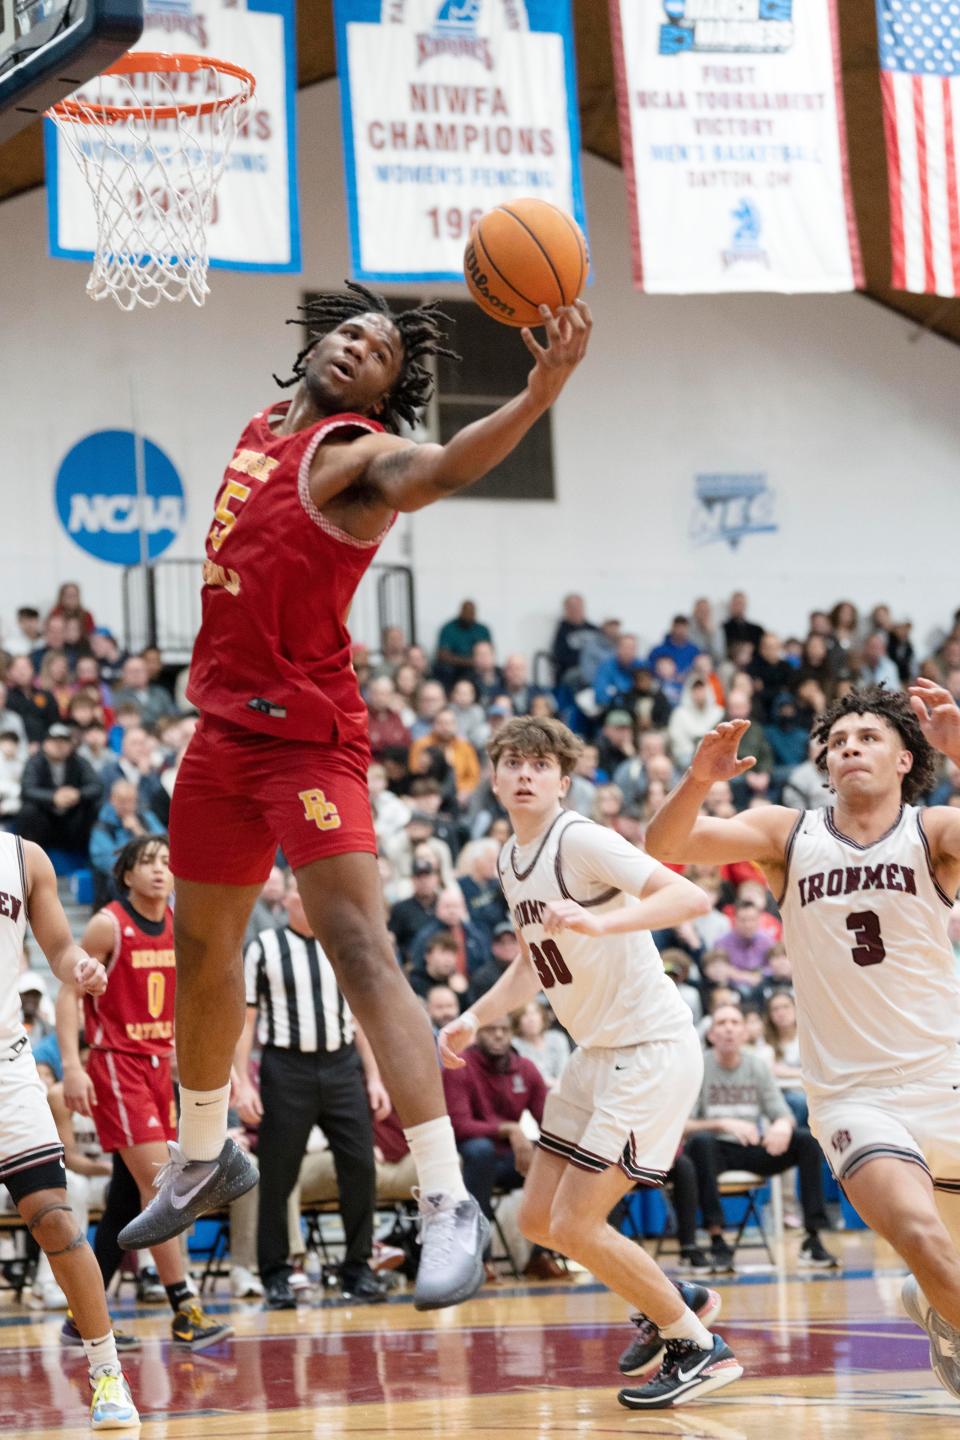 Bergen Catholic vs. Don Bosco in the 66th Bergen County Jamboree Boys Basketball Tournament final at the Rothman Center at Fairleigh Dickinson University in Hackensack on Friday, February 17, 2023. BC #5 Terry Copeland grabs a rebound.